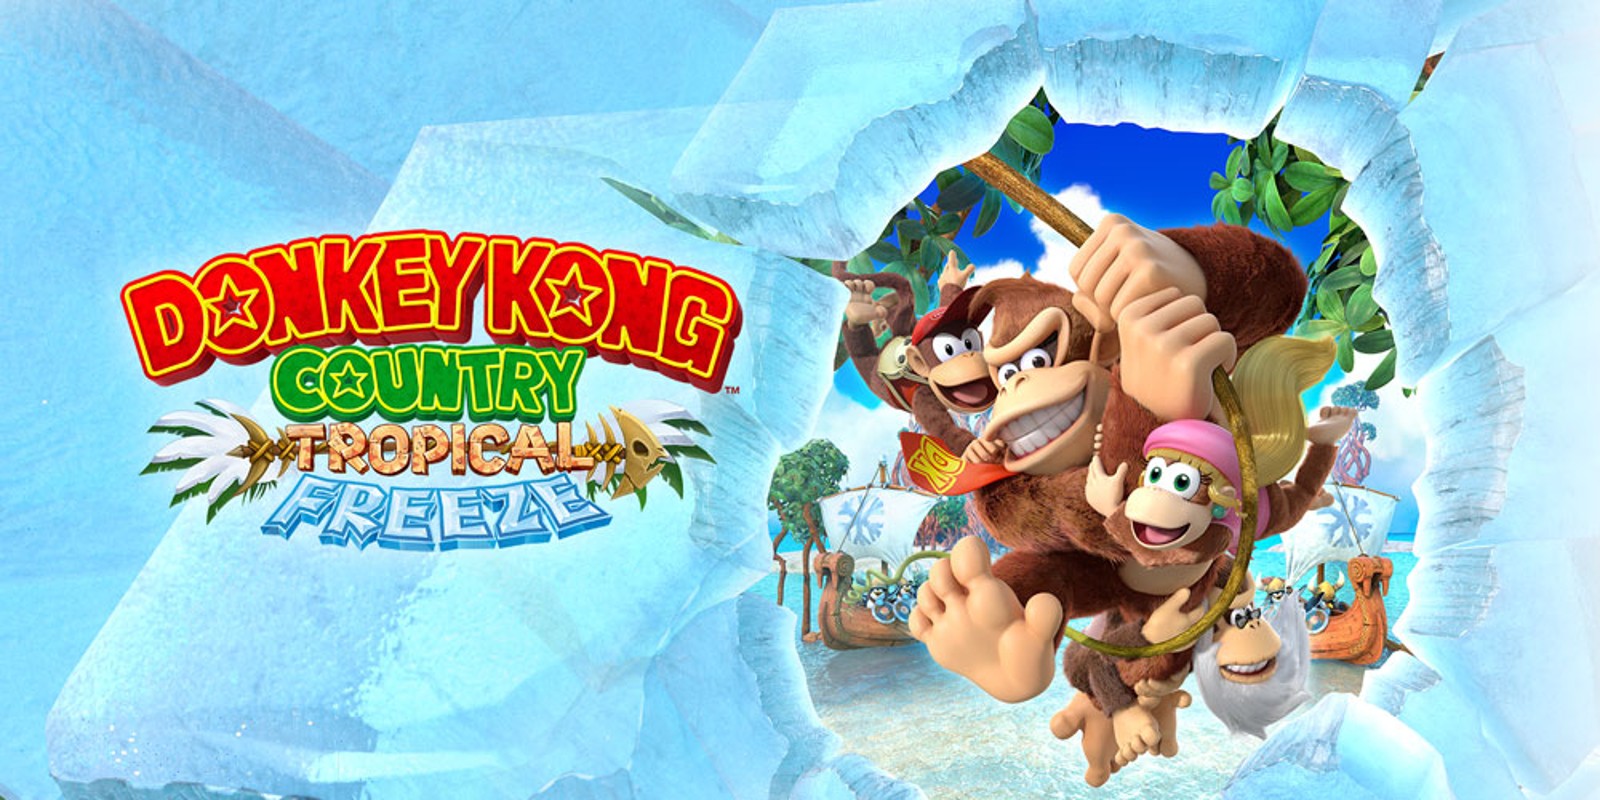 Donkey Kong: Country Tropical Freeze